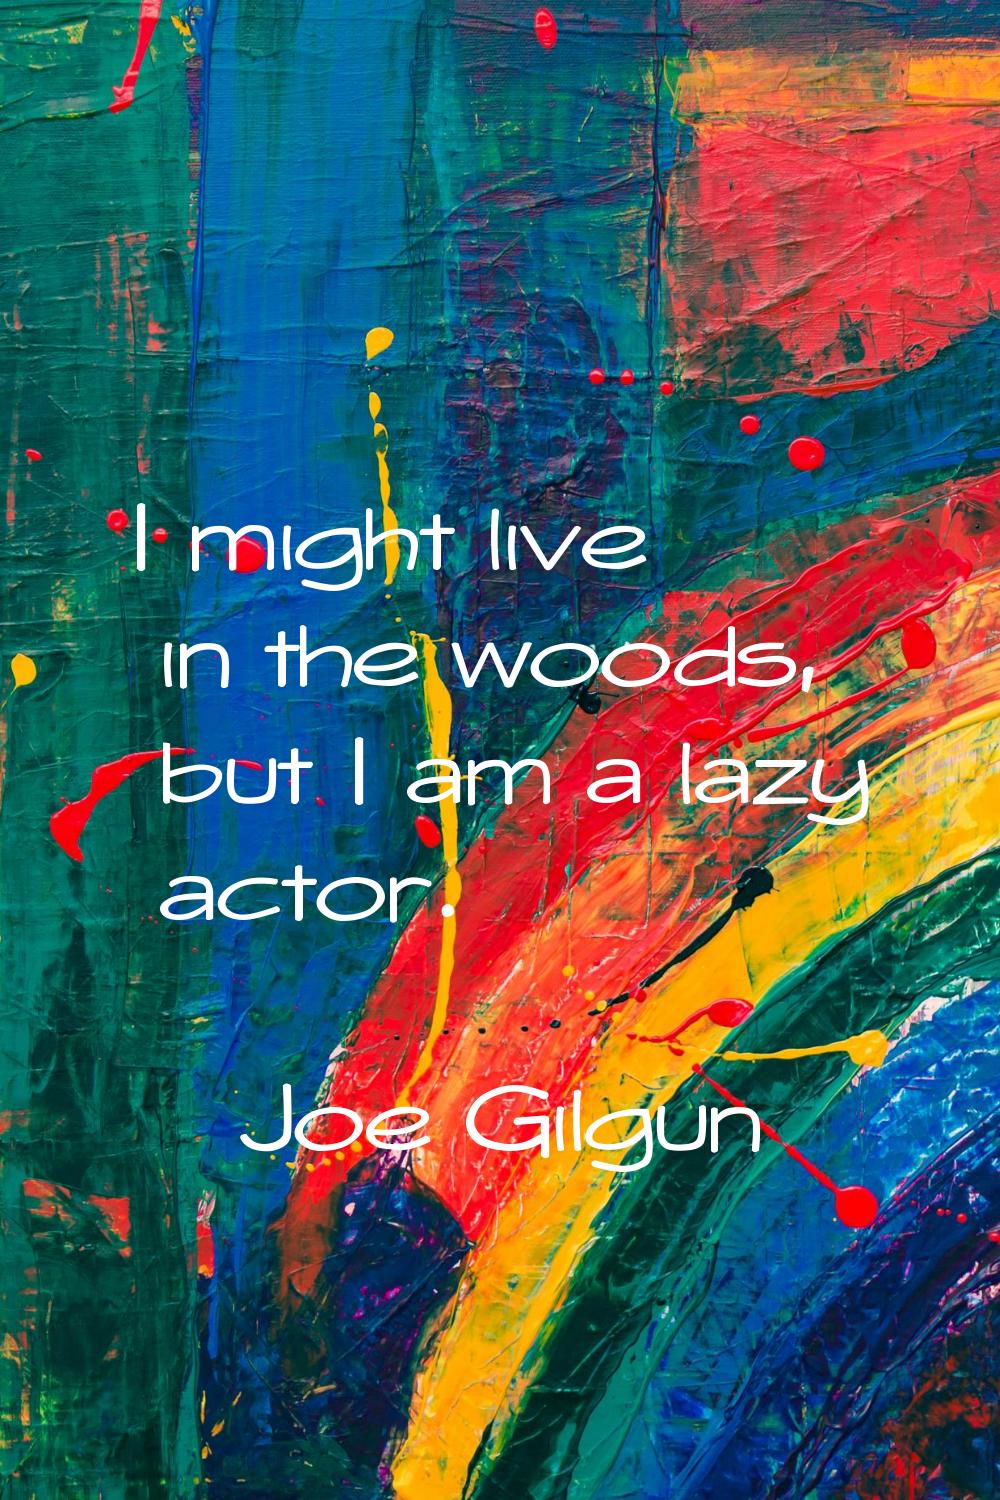 I might live in the woods, but I am a lazy actor.